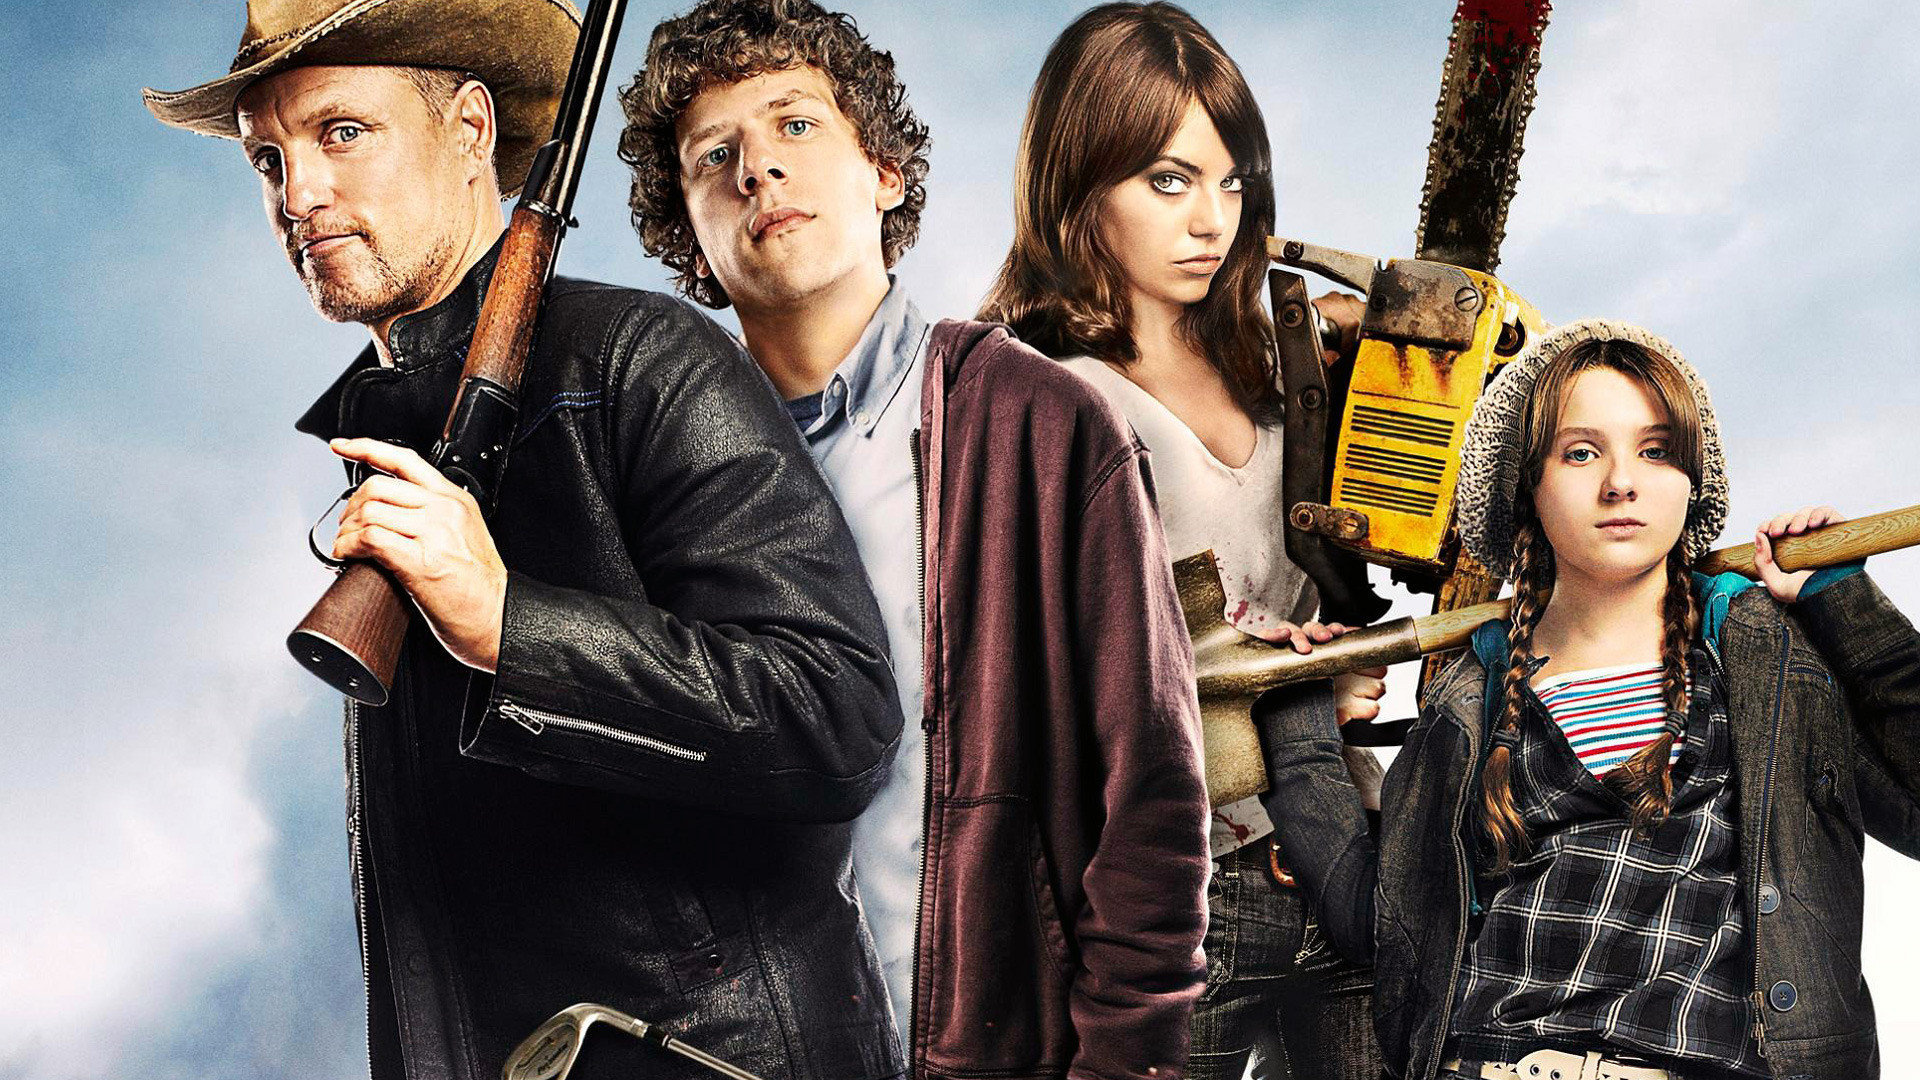 Zombieland: The film was theatrically released in the United States on October 2, 2009. 1920x1080 Full HD Background.